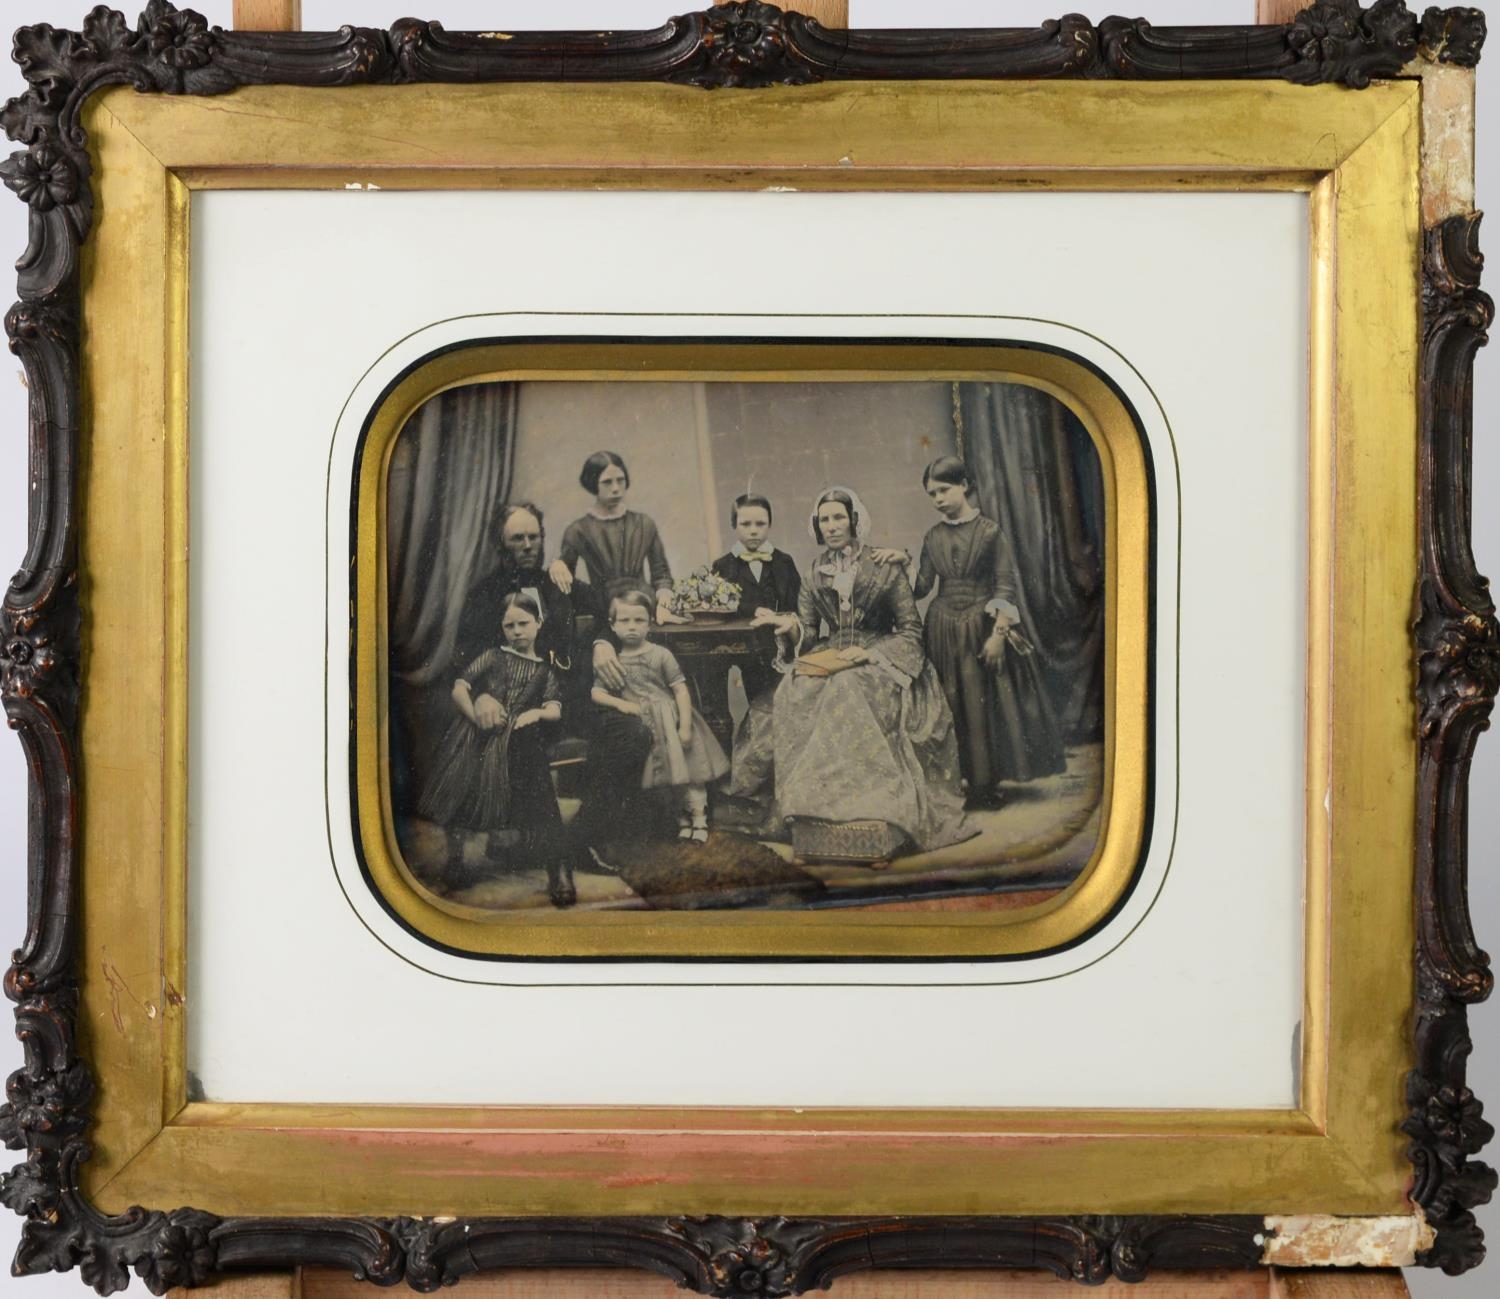 MID NINETEENTH CENTURY SLIGHTLY TINTED DAGUERREOTYPE OF A FAMILY contained in original glazed - Image 2 of 2